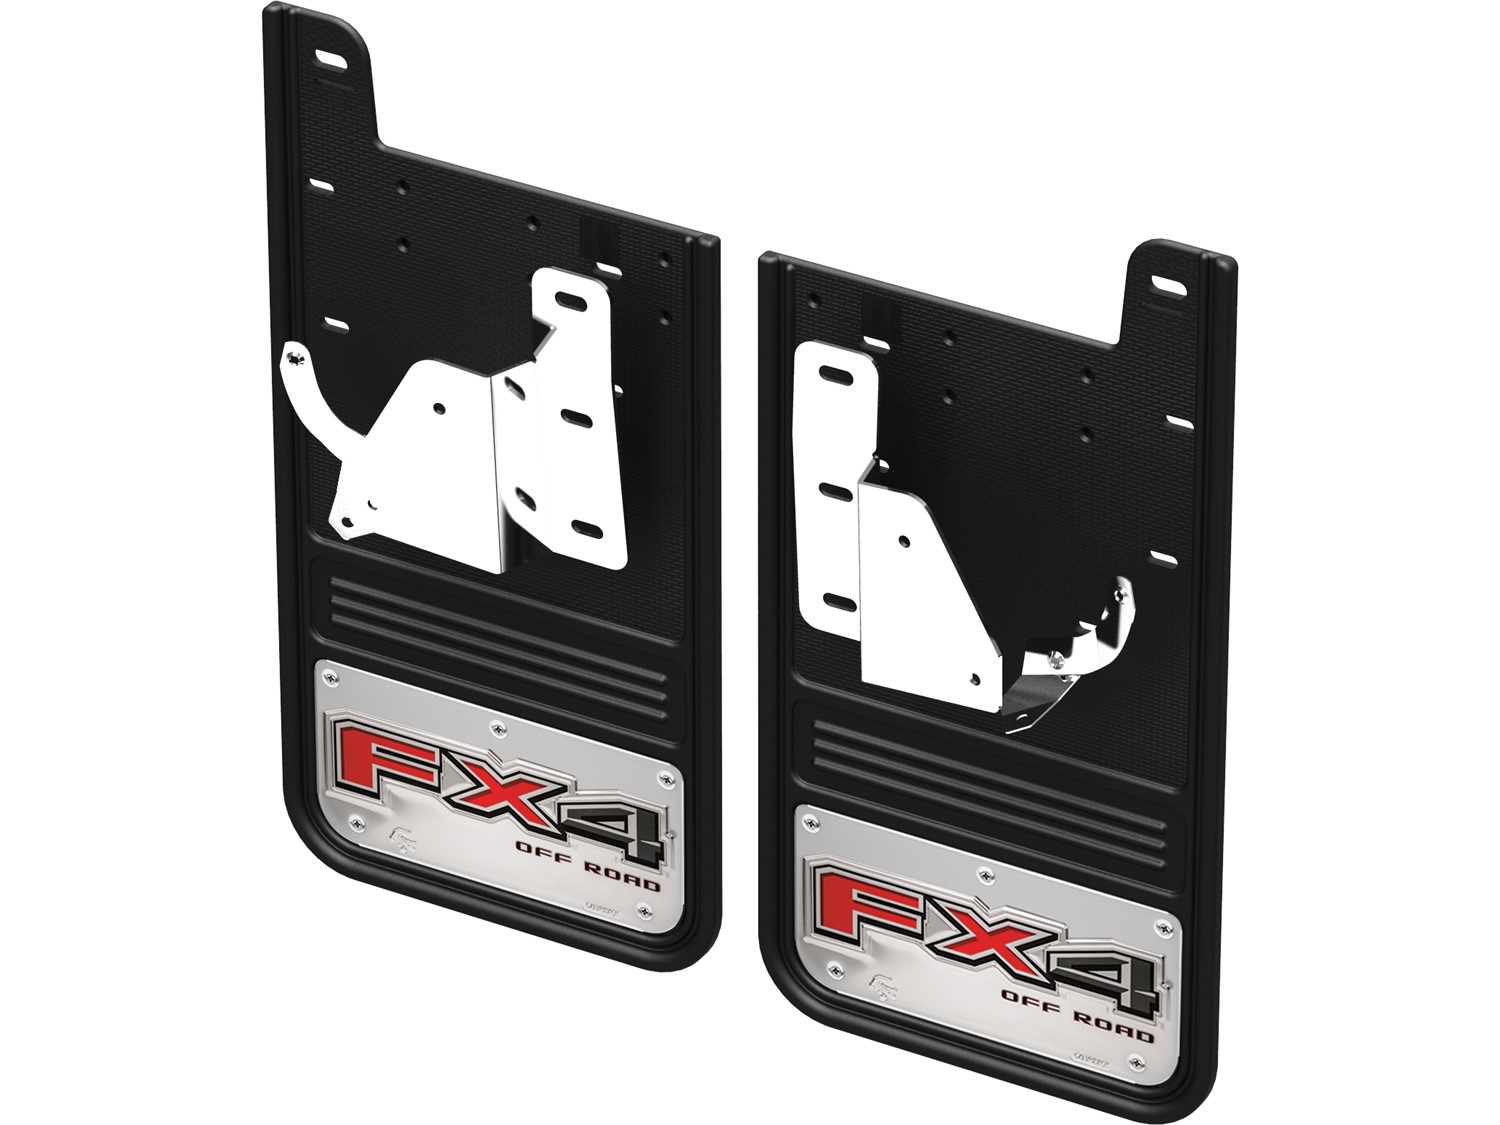 Image for Splash Guards - Gatorback by Truck Hardware, Rear Pair, FX4 Stainless from AccessoriesCanada